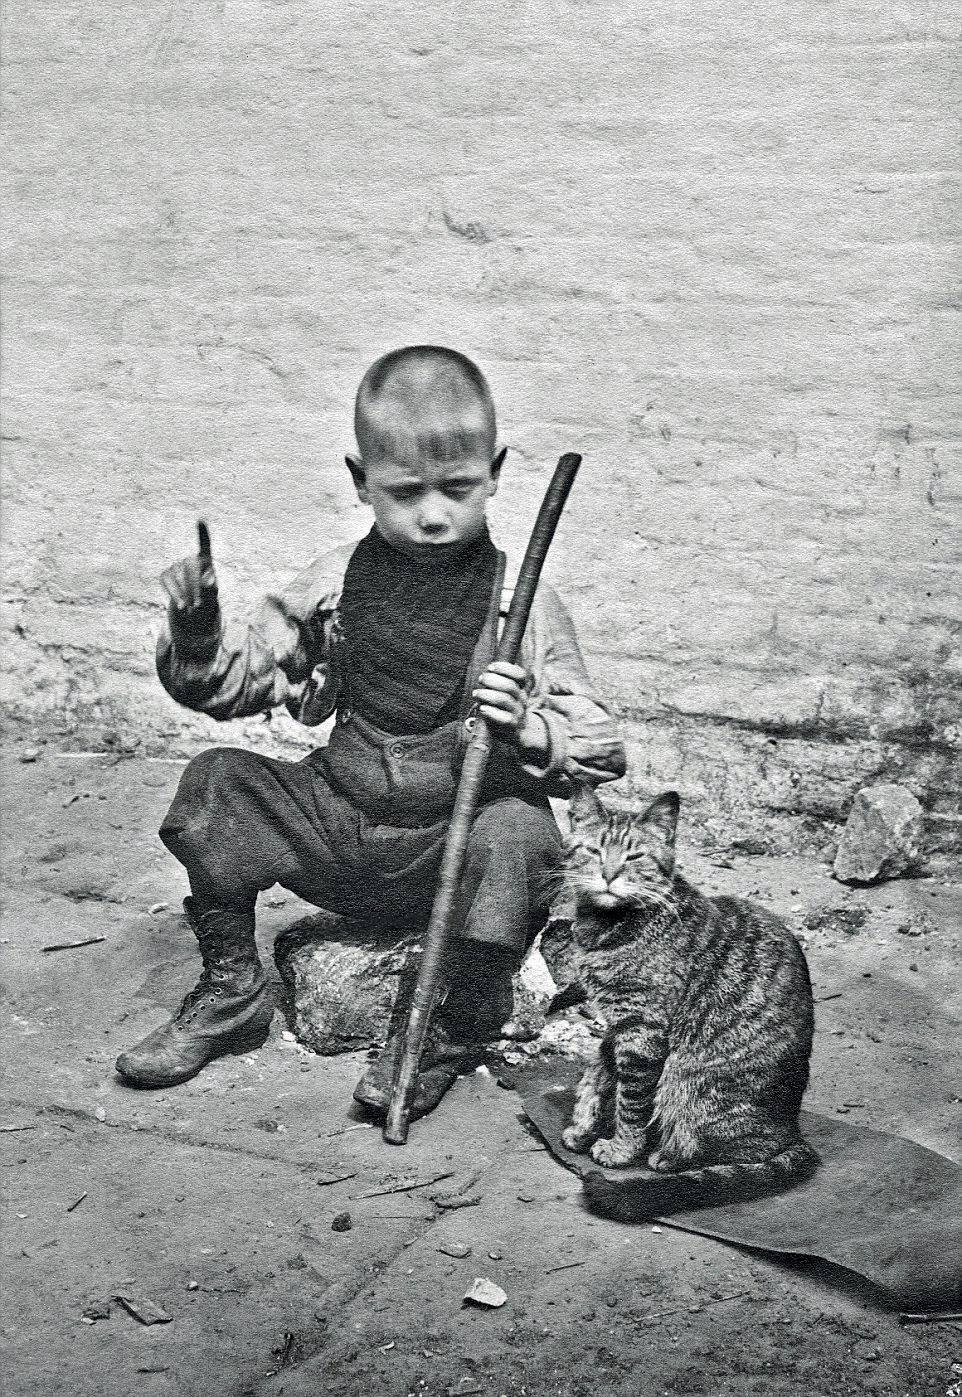 London's East End, 1914. Jeremiah Donovan, six, was nicknamed 'Dick Whittington' because of his pet cat. Photographer Horace Warner